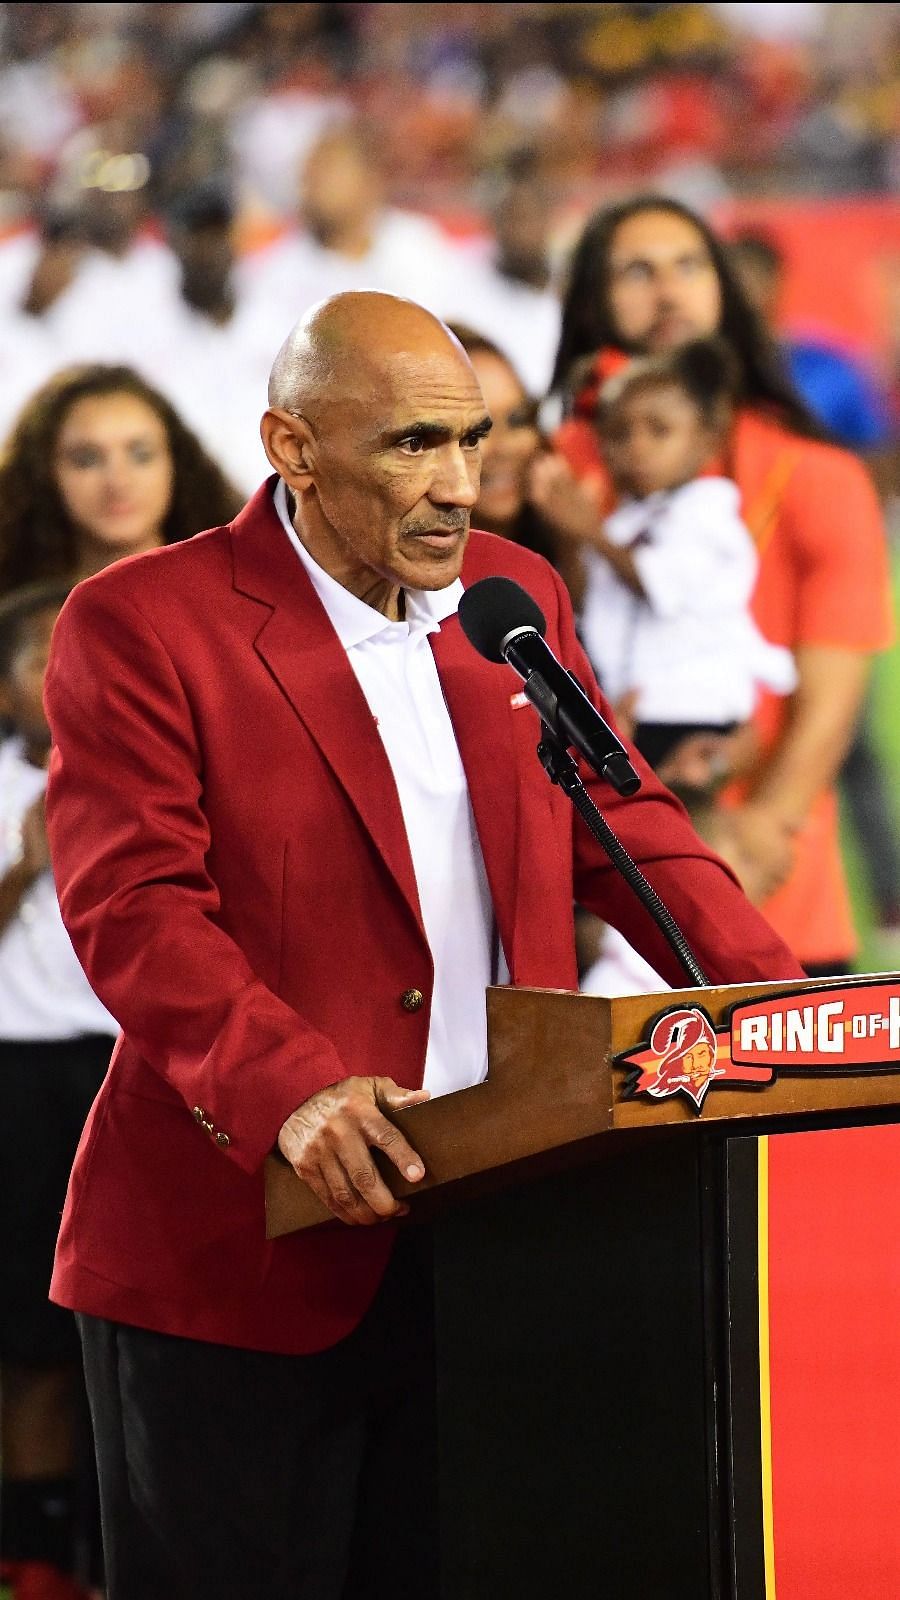 Who did Tony Dungy coach in the NFL?